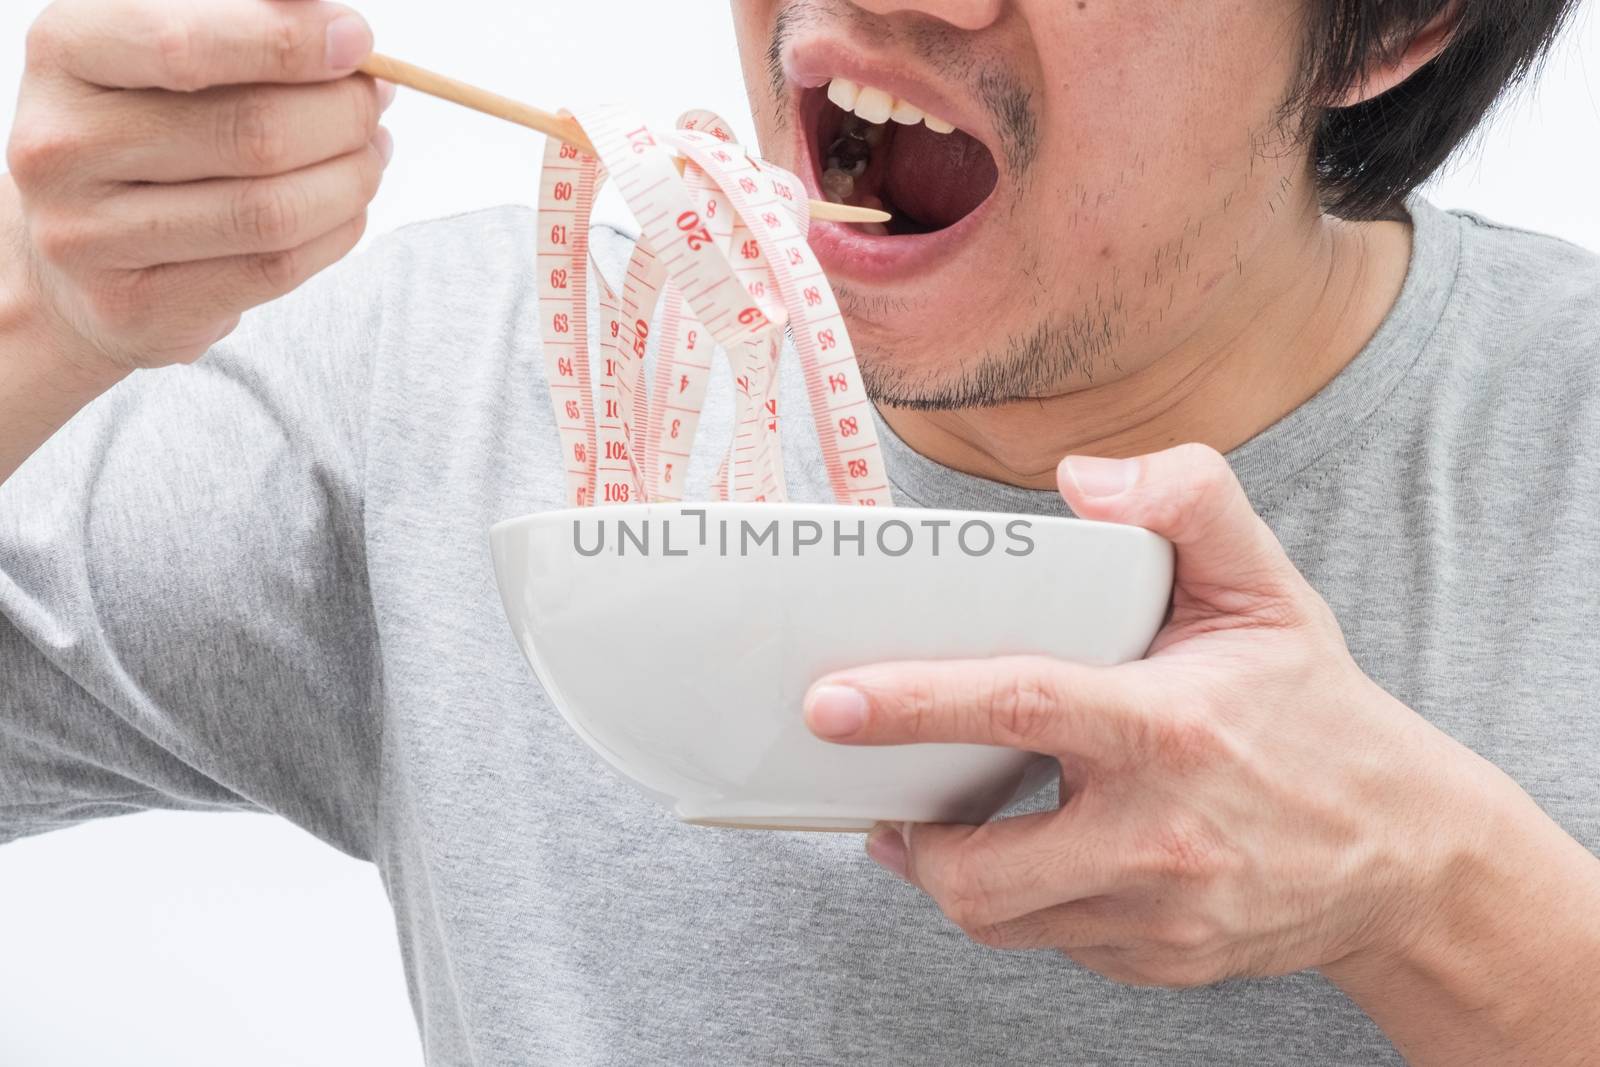 Asian man eating waist measure by zneb076